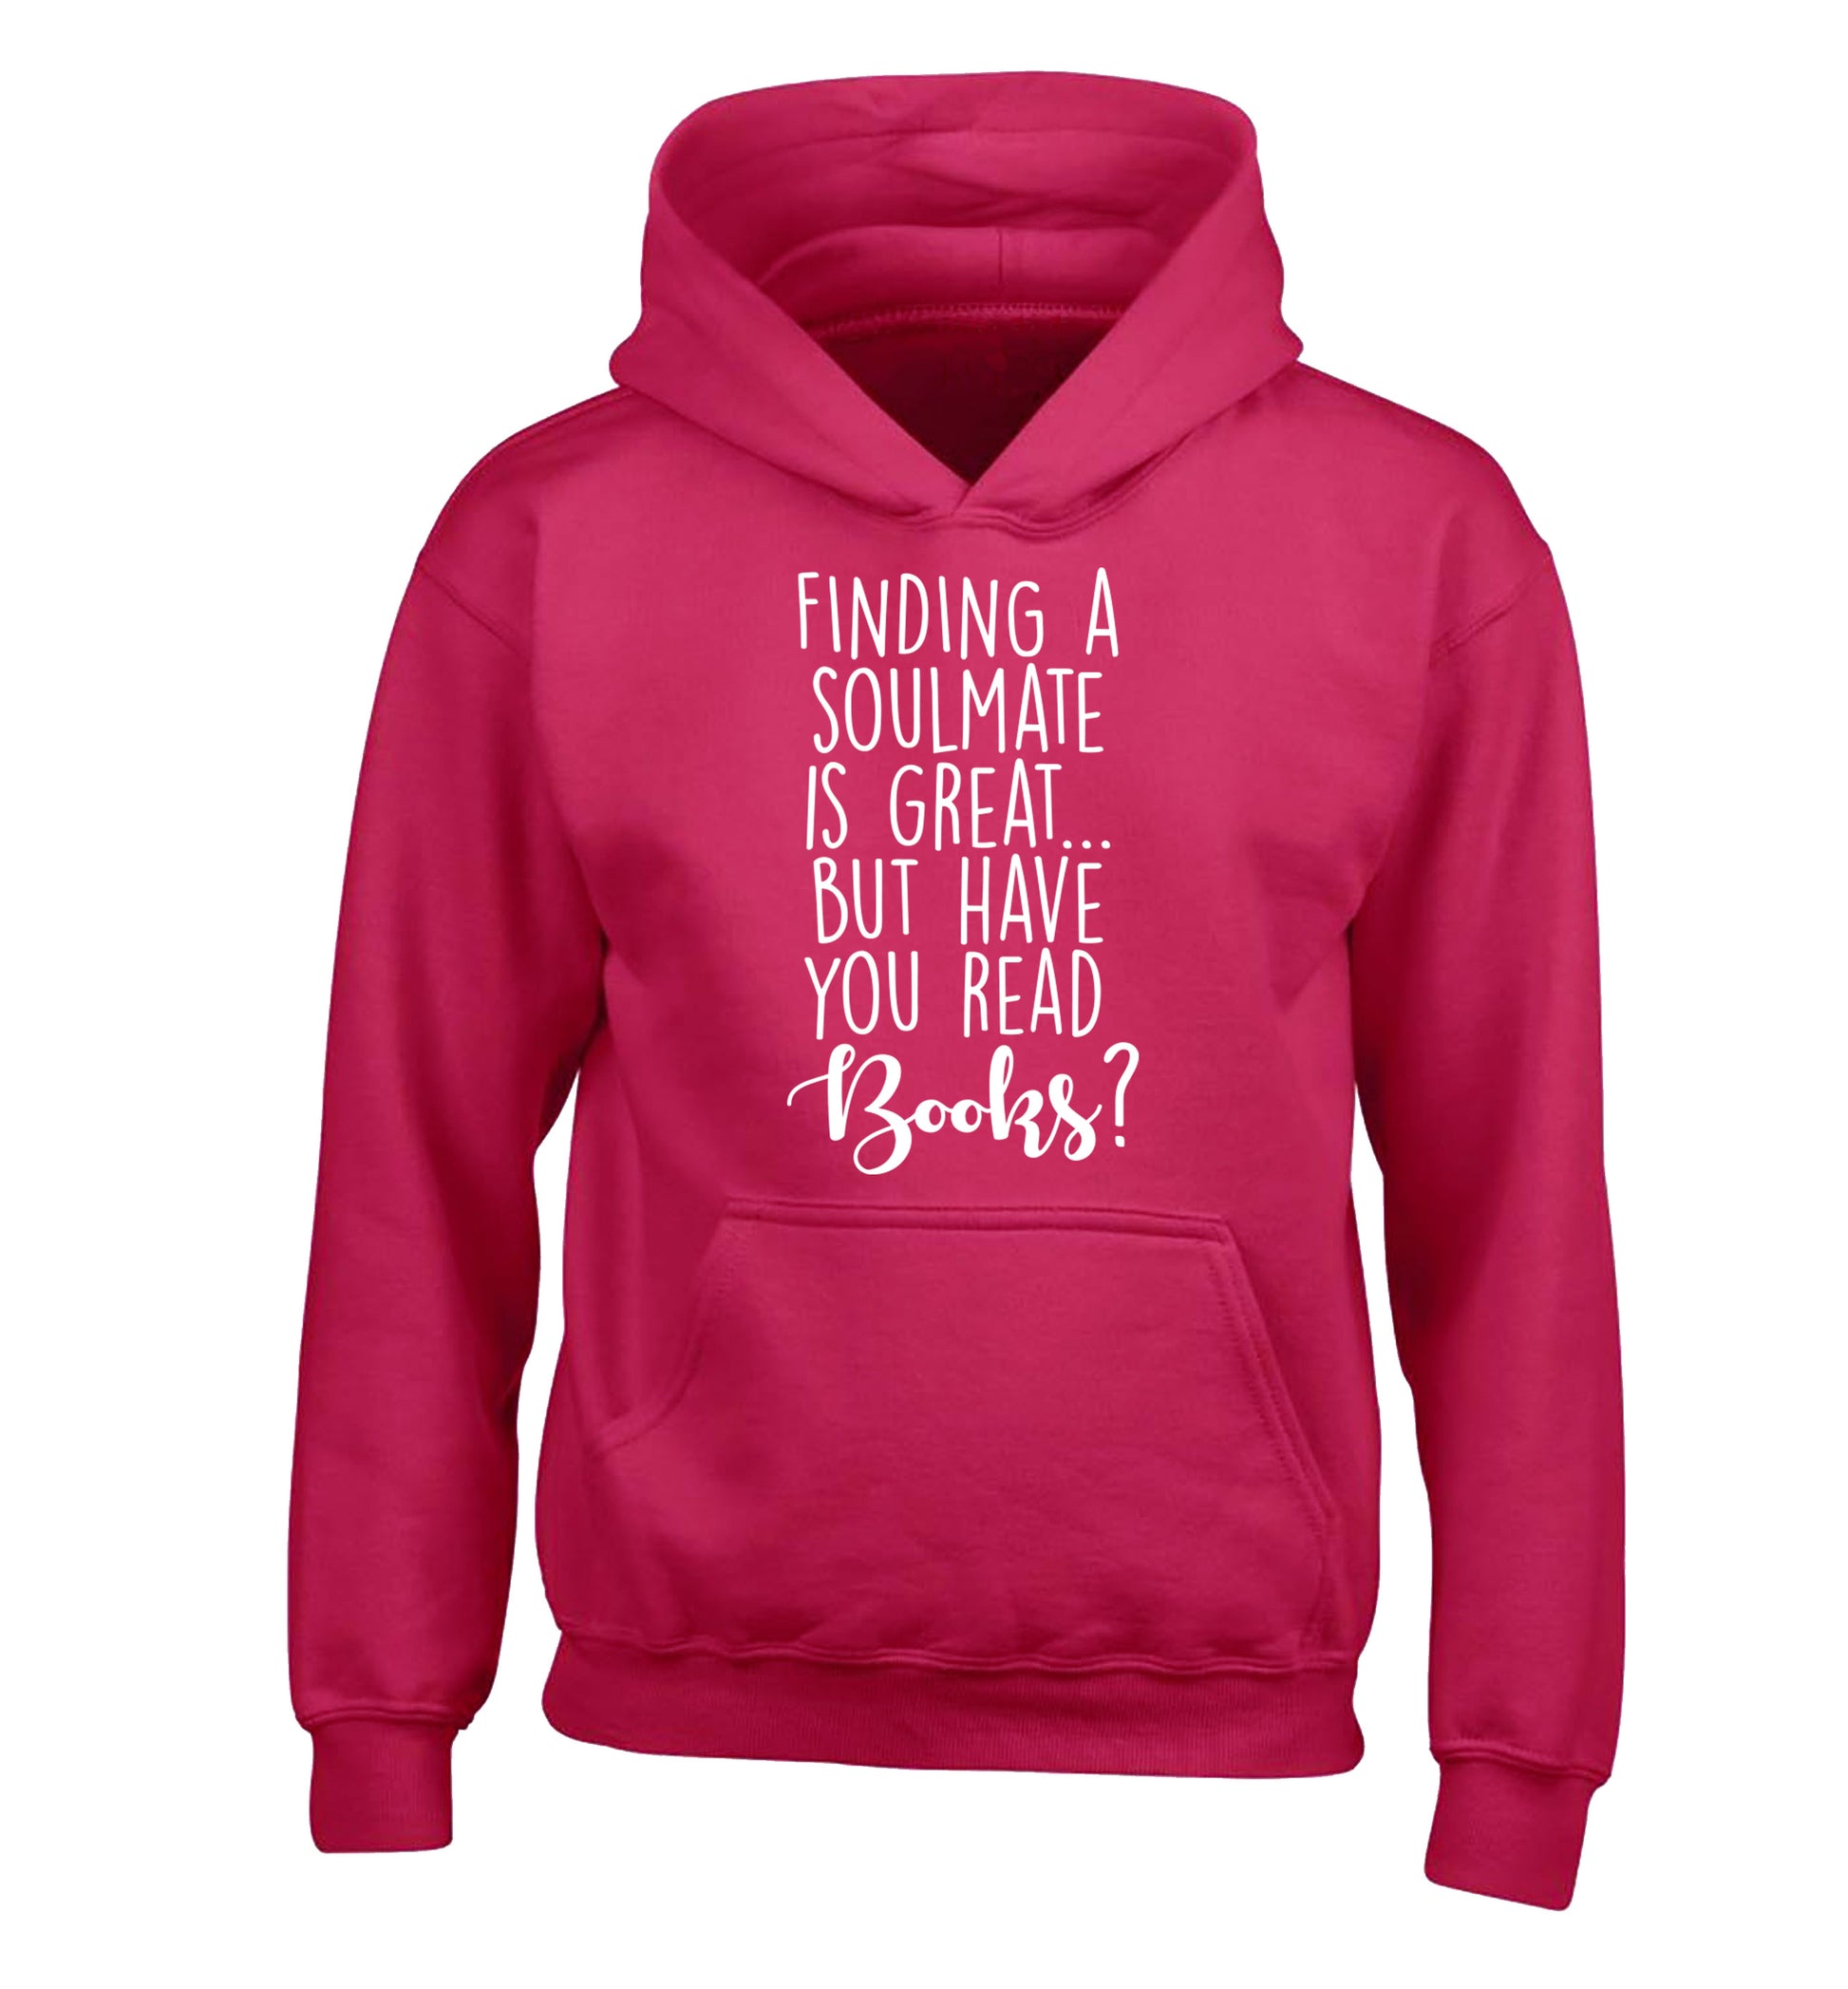 Finding a soulmate is great but have you read books? children's pink hoodie 12-13 Years